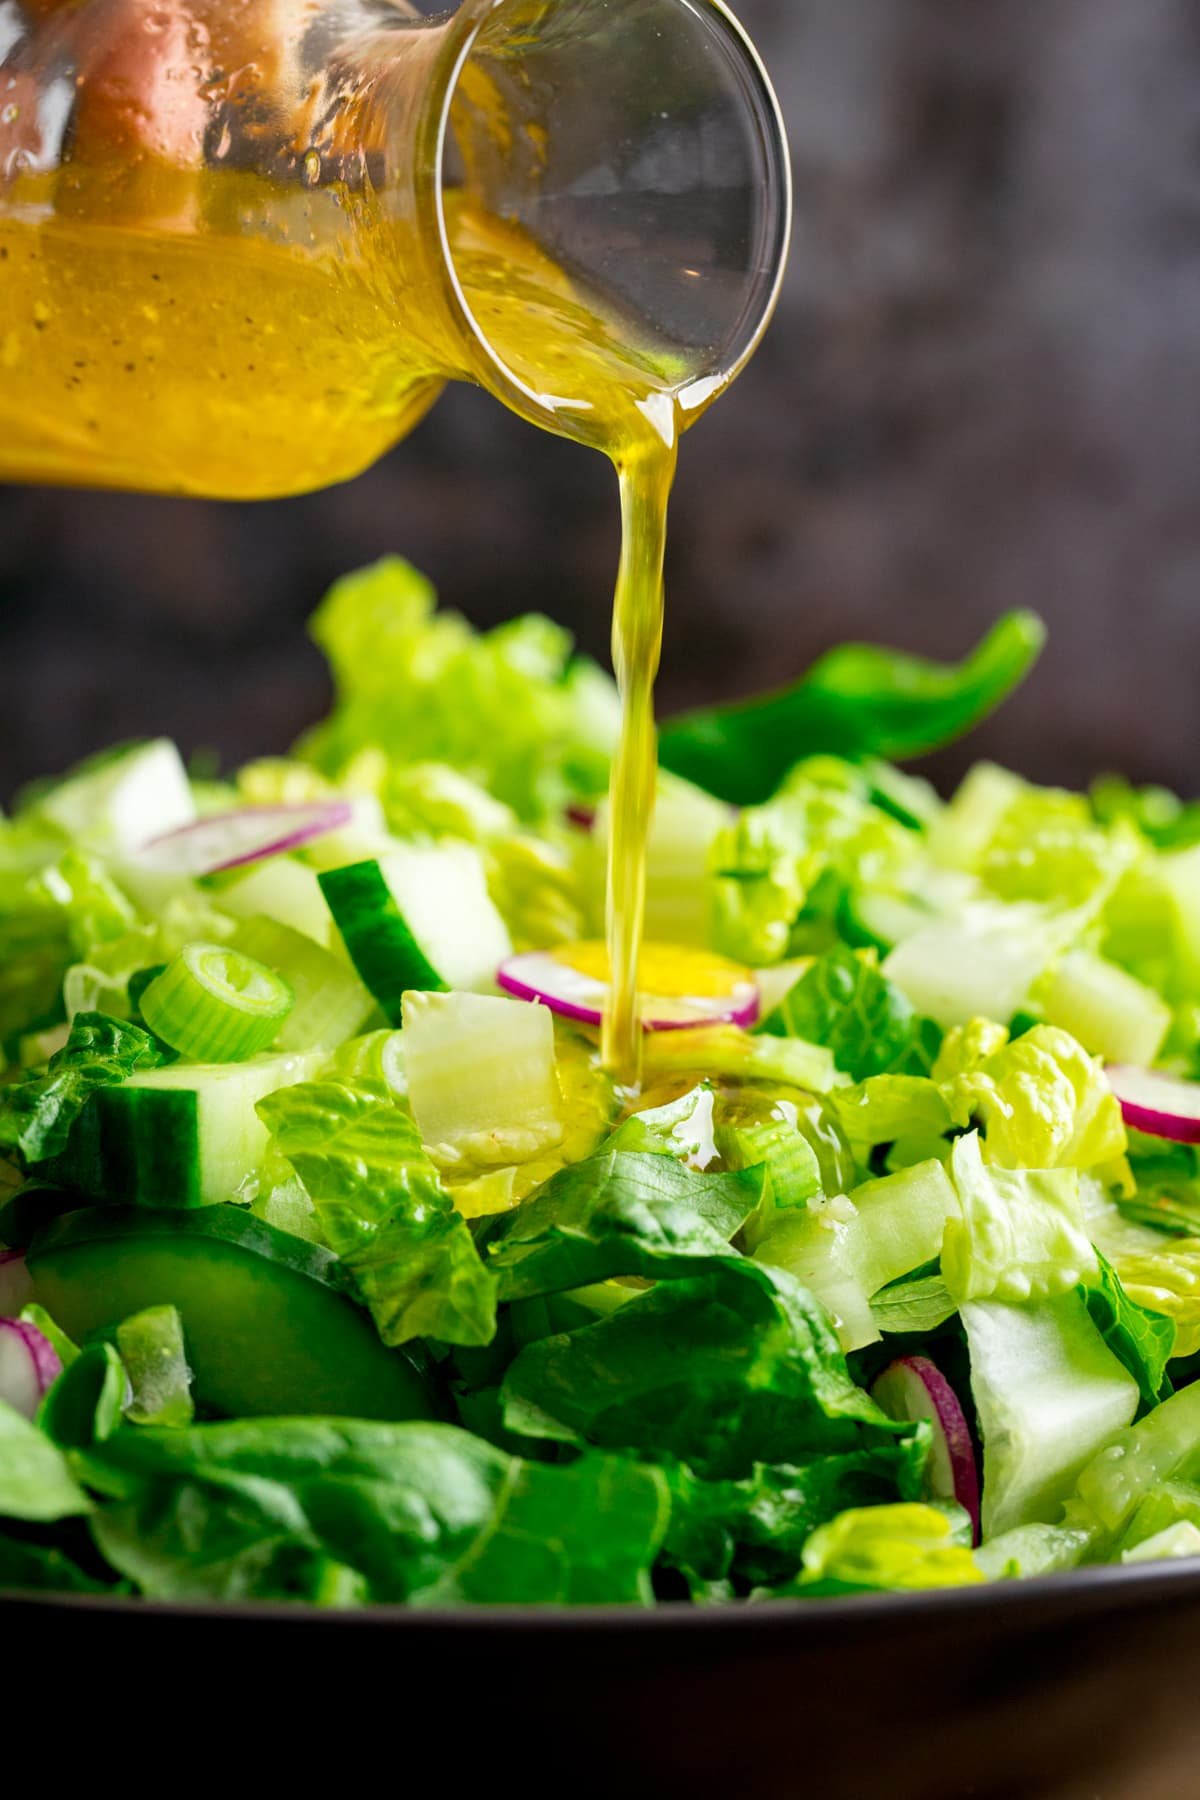 Vinaigrette dressing being poured from a small glass jar onto a green salad.